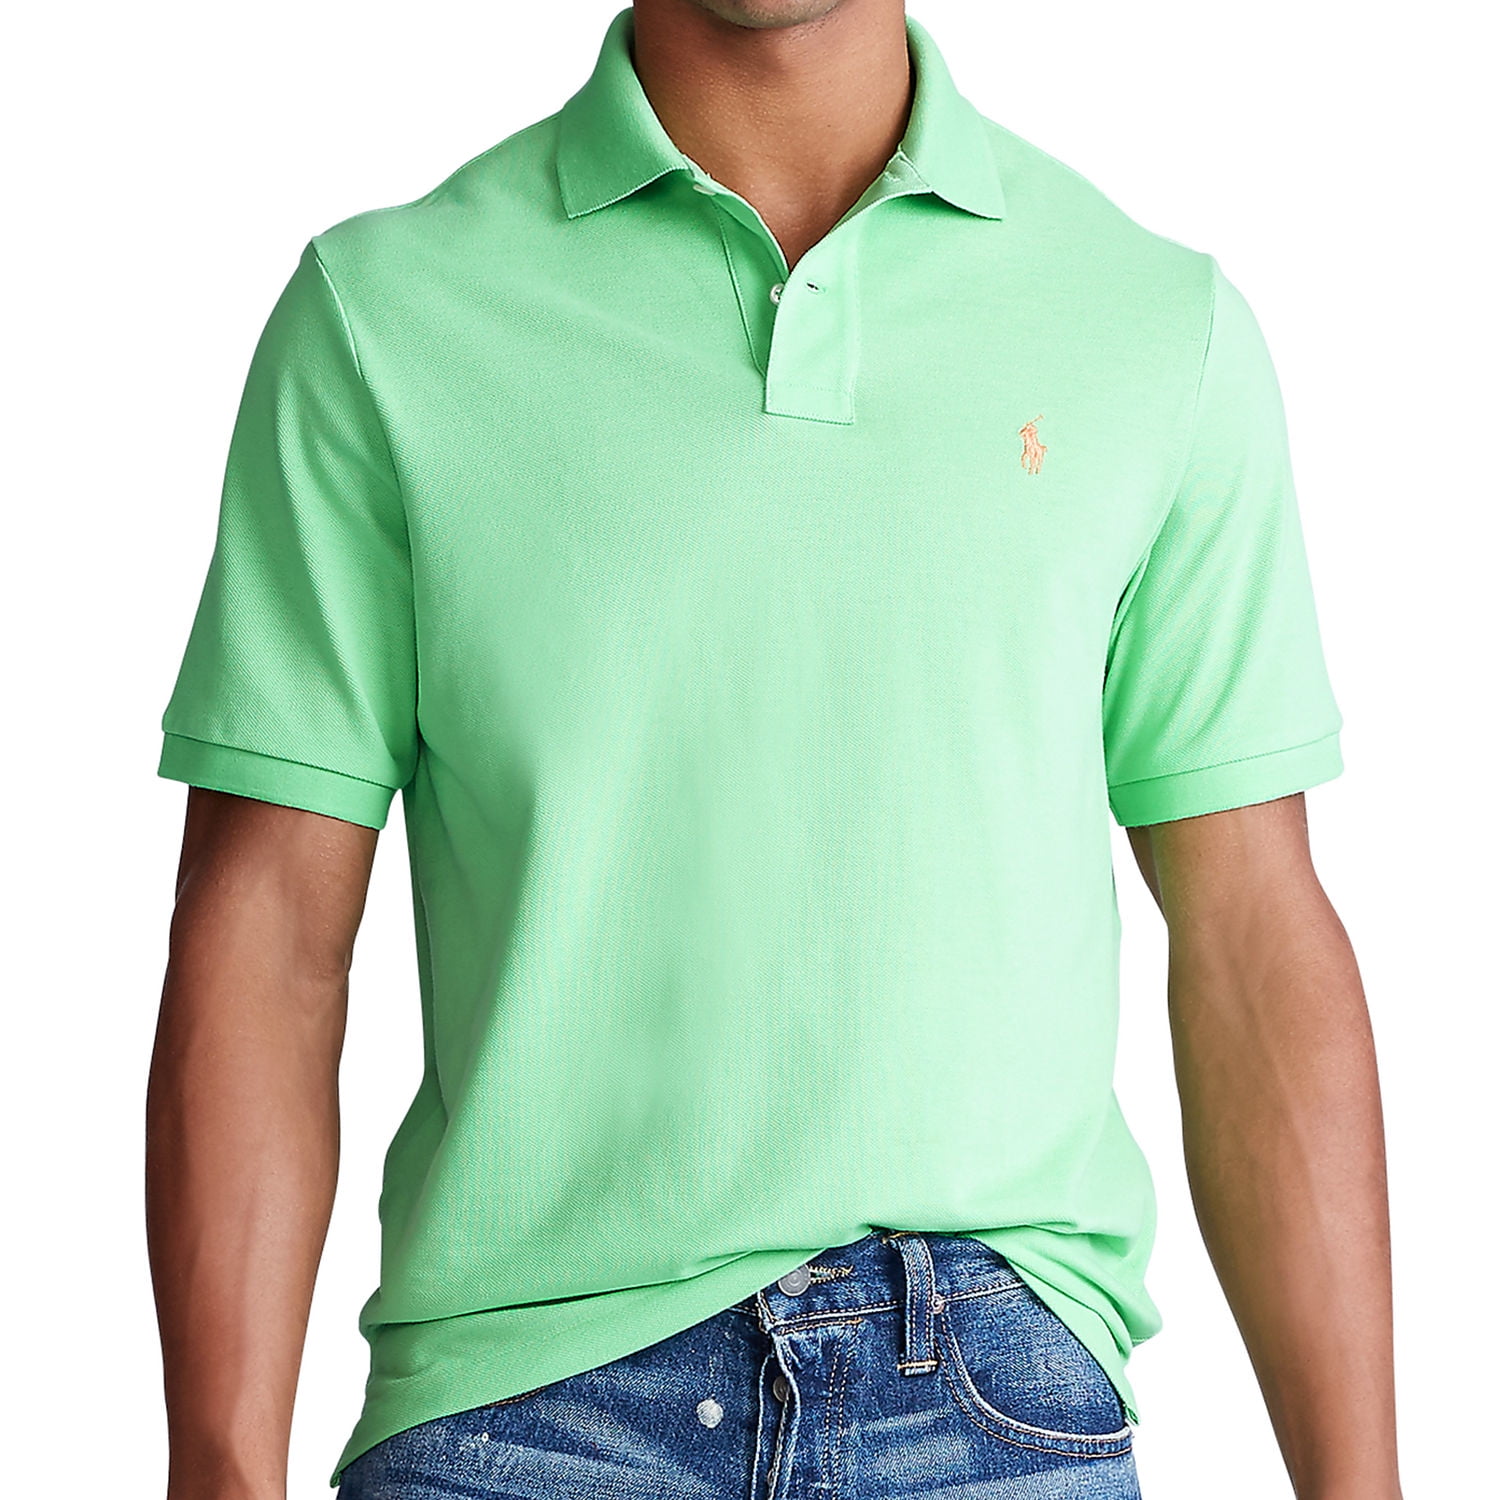 Polo Ralph Lauren Mens Classic Fit Mesh Polo Shirt (XSmall, New Lime Green)  